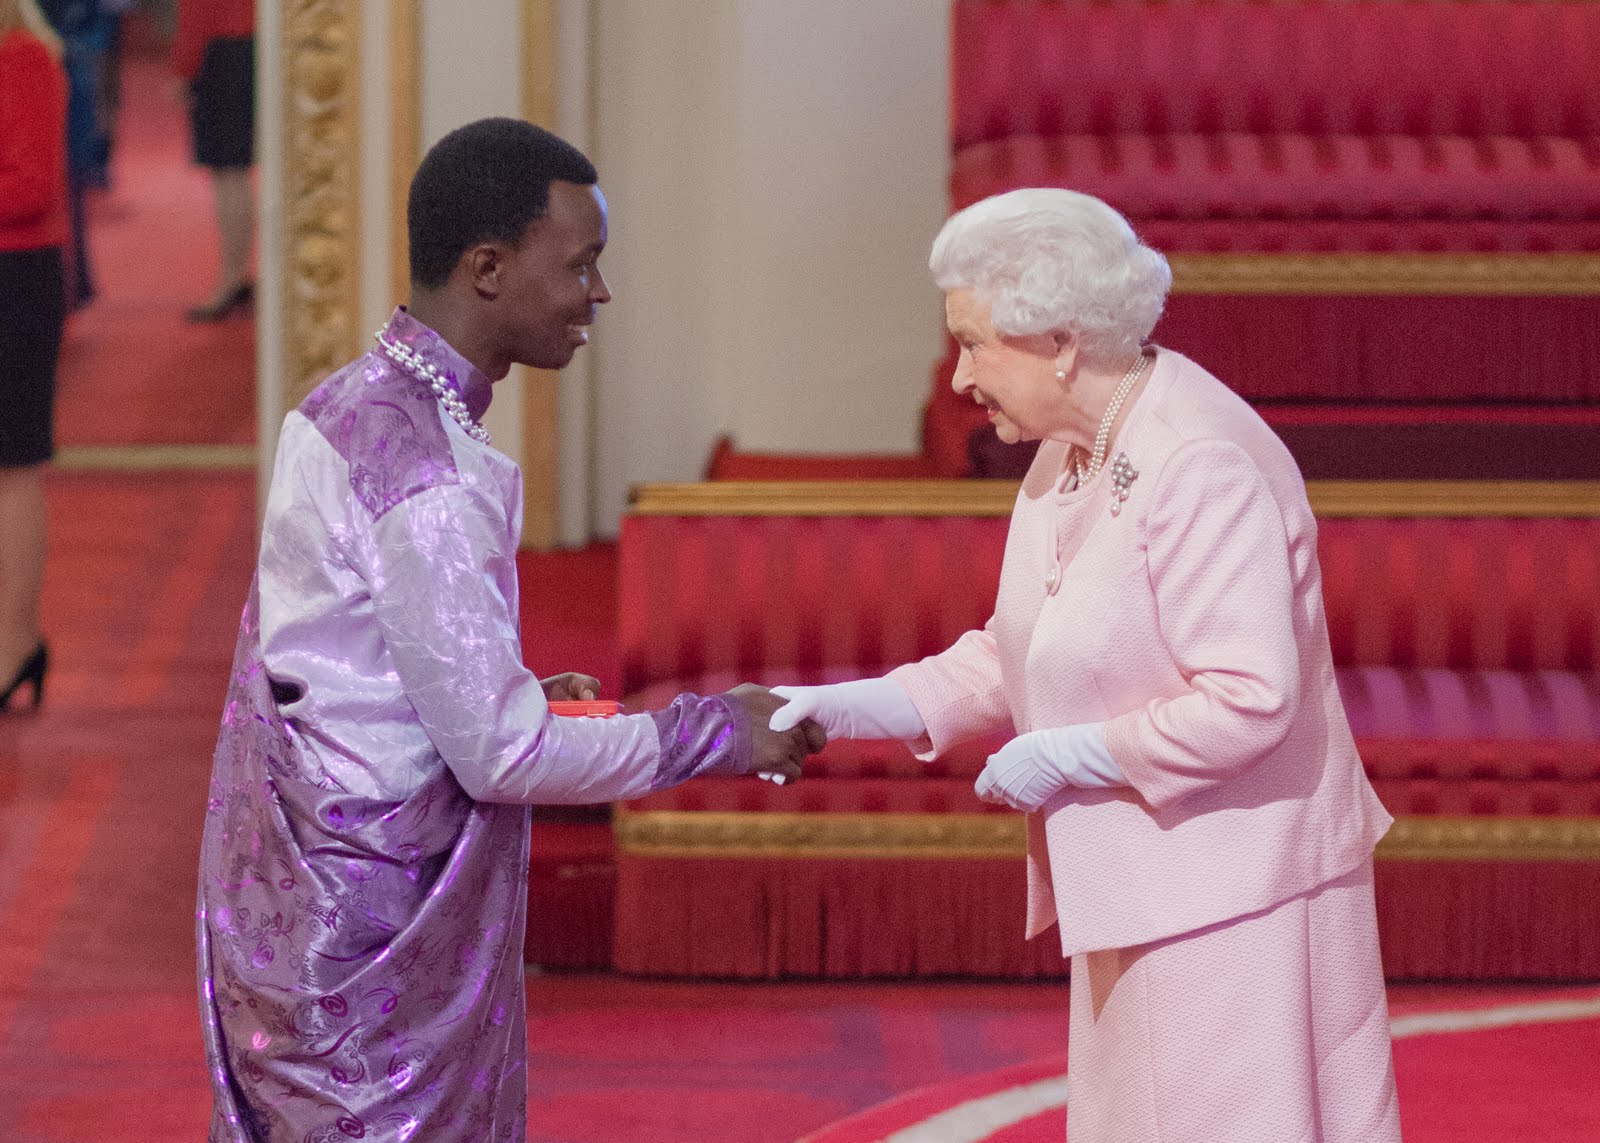 Jean d’Amour Mutoni 2015 Queen's Young Leader from Rwanda